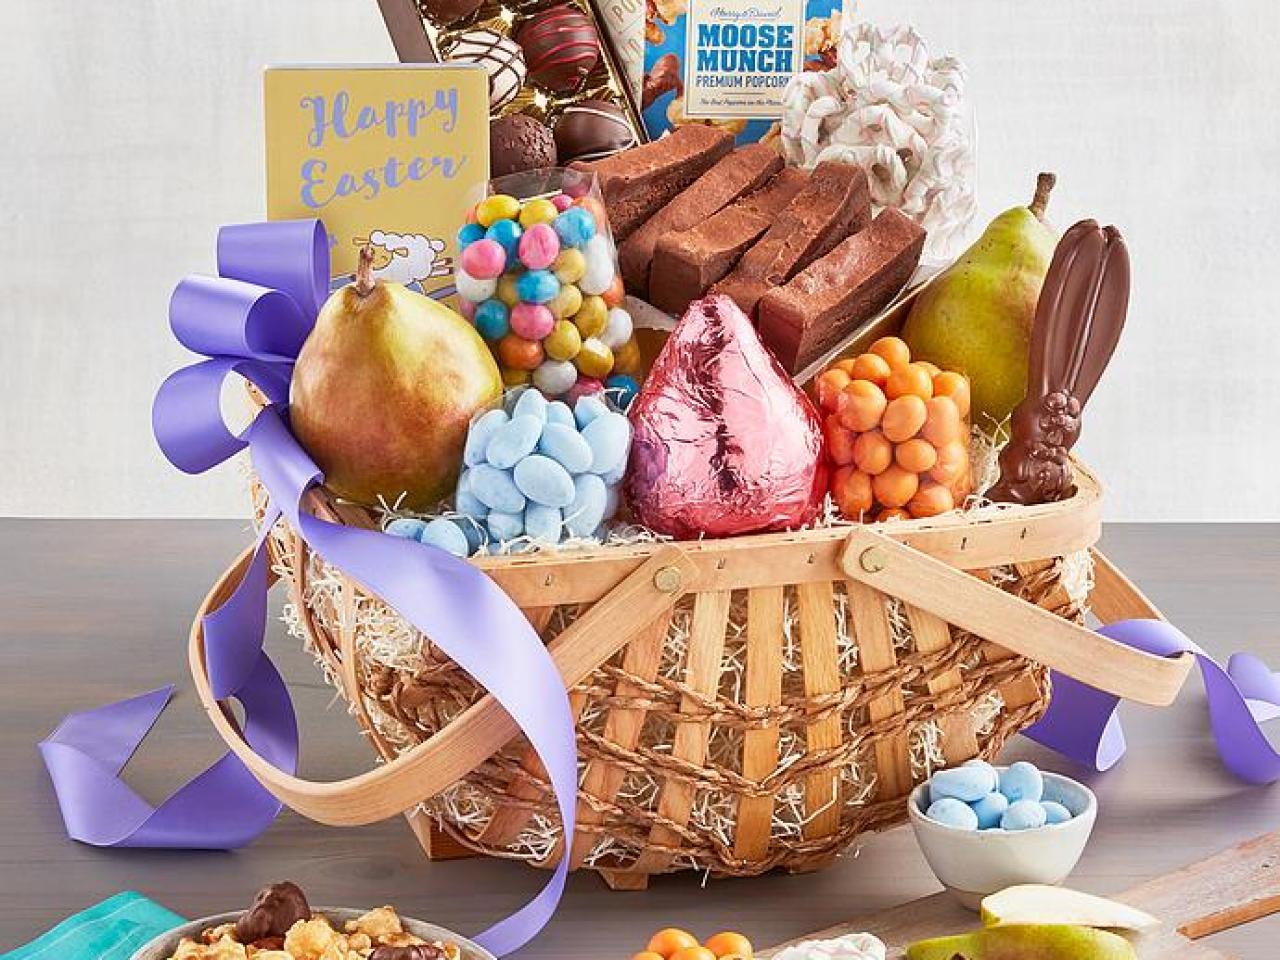 29 Fun Easter Basket Fillers! - Pretty Real